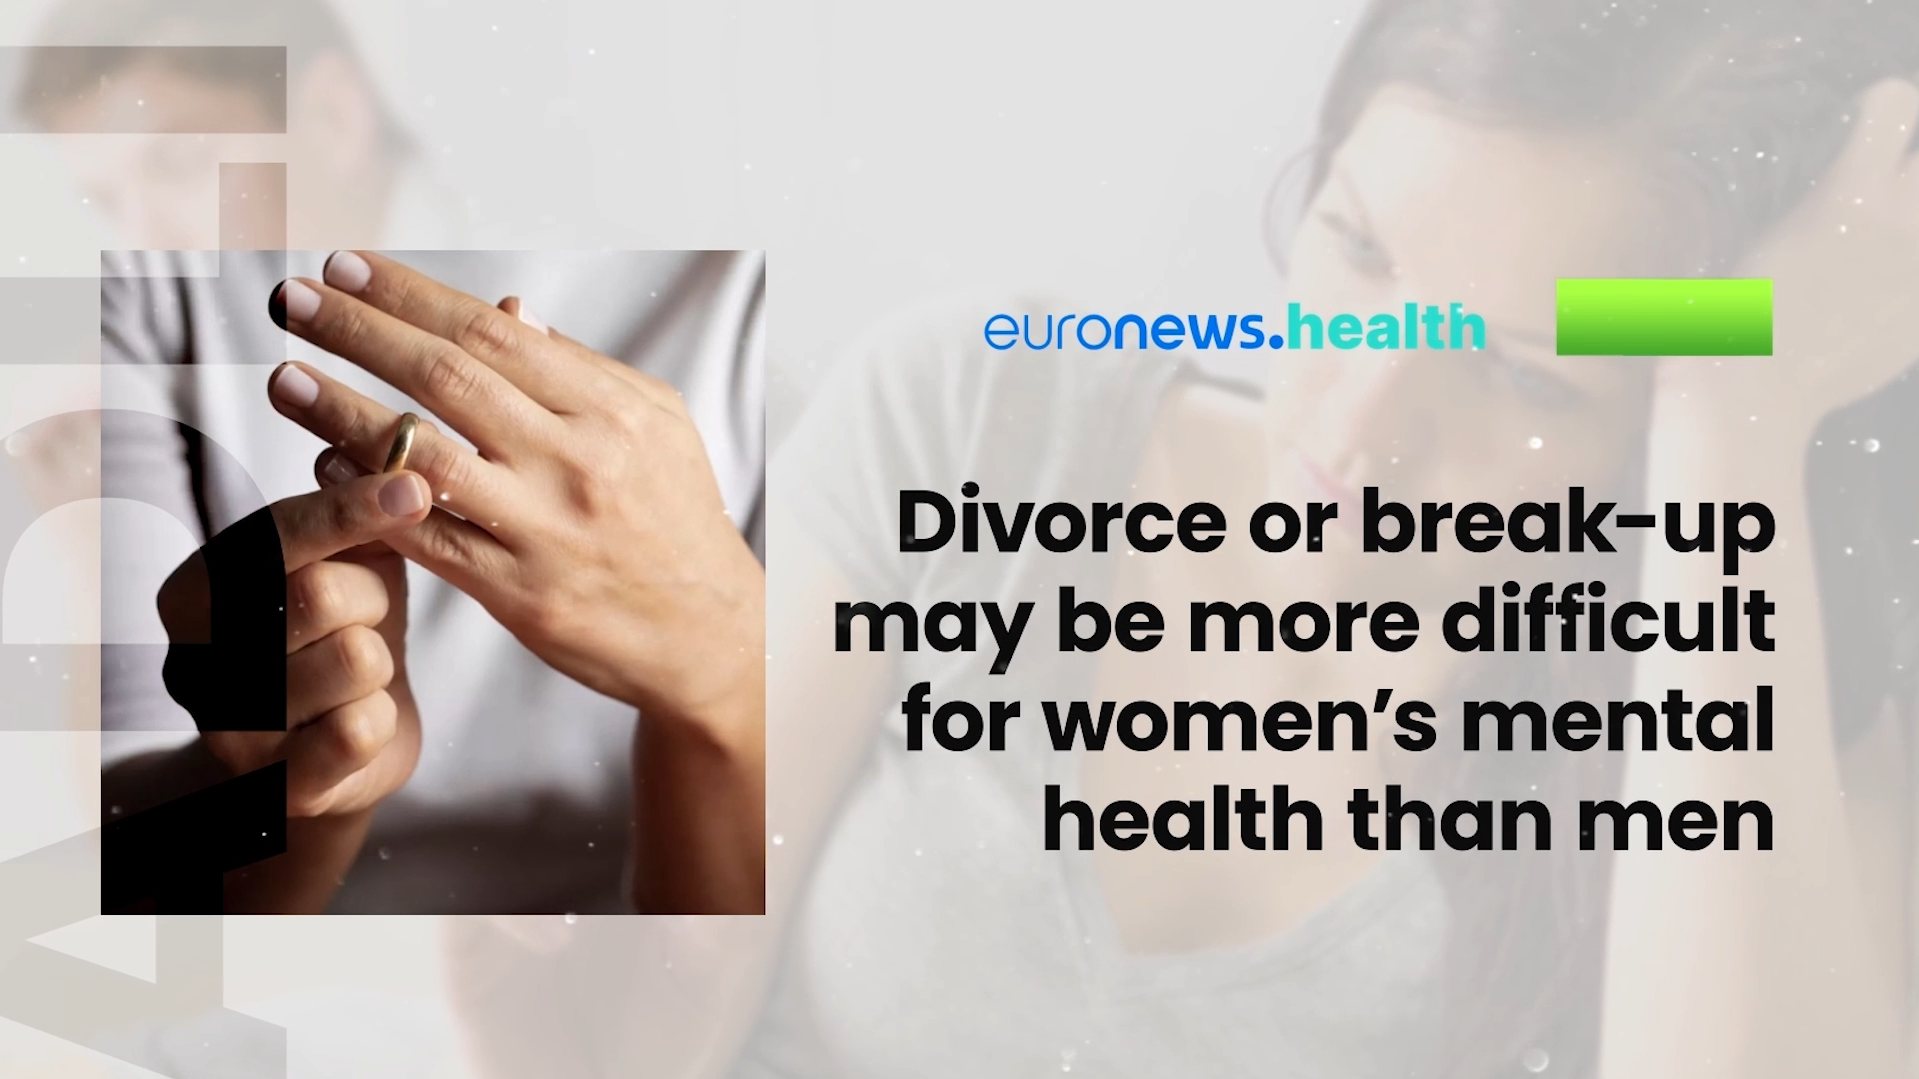 Are Divorced Women at Risk? Is Your Phone Ruining Relationships? How Can We Save Our Teens?